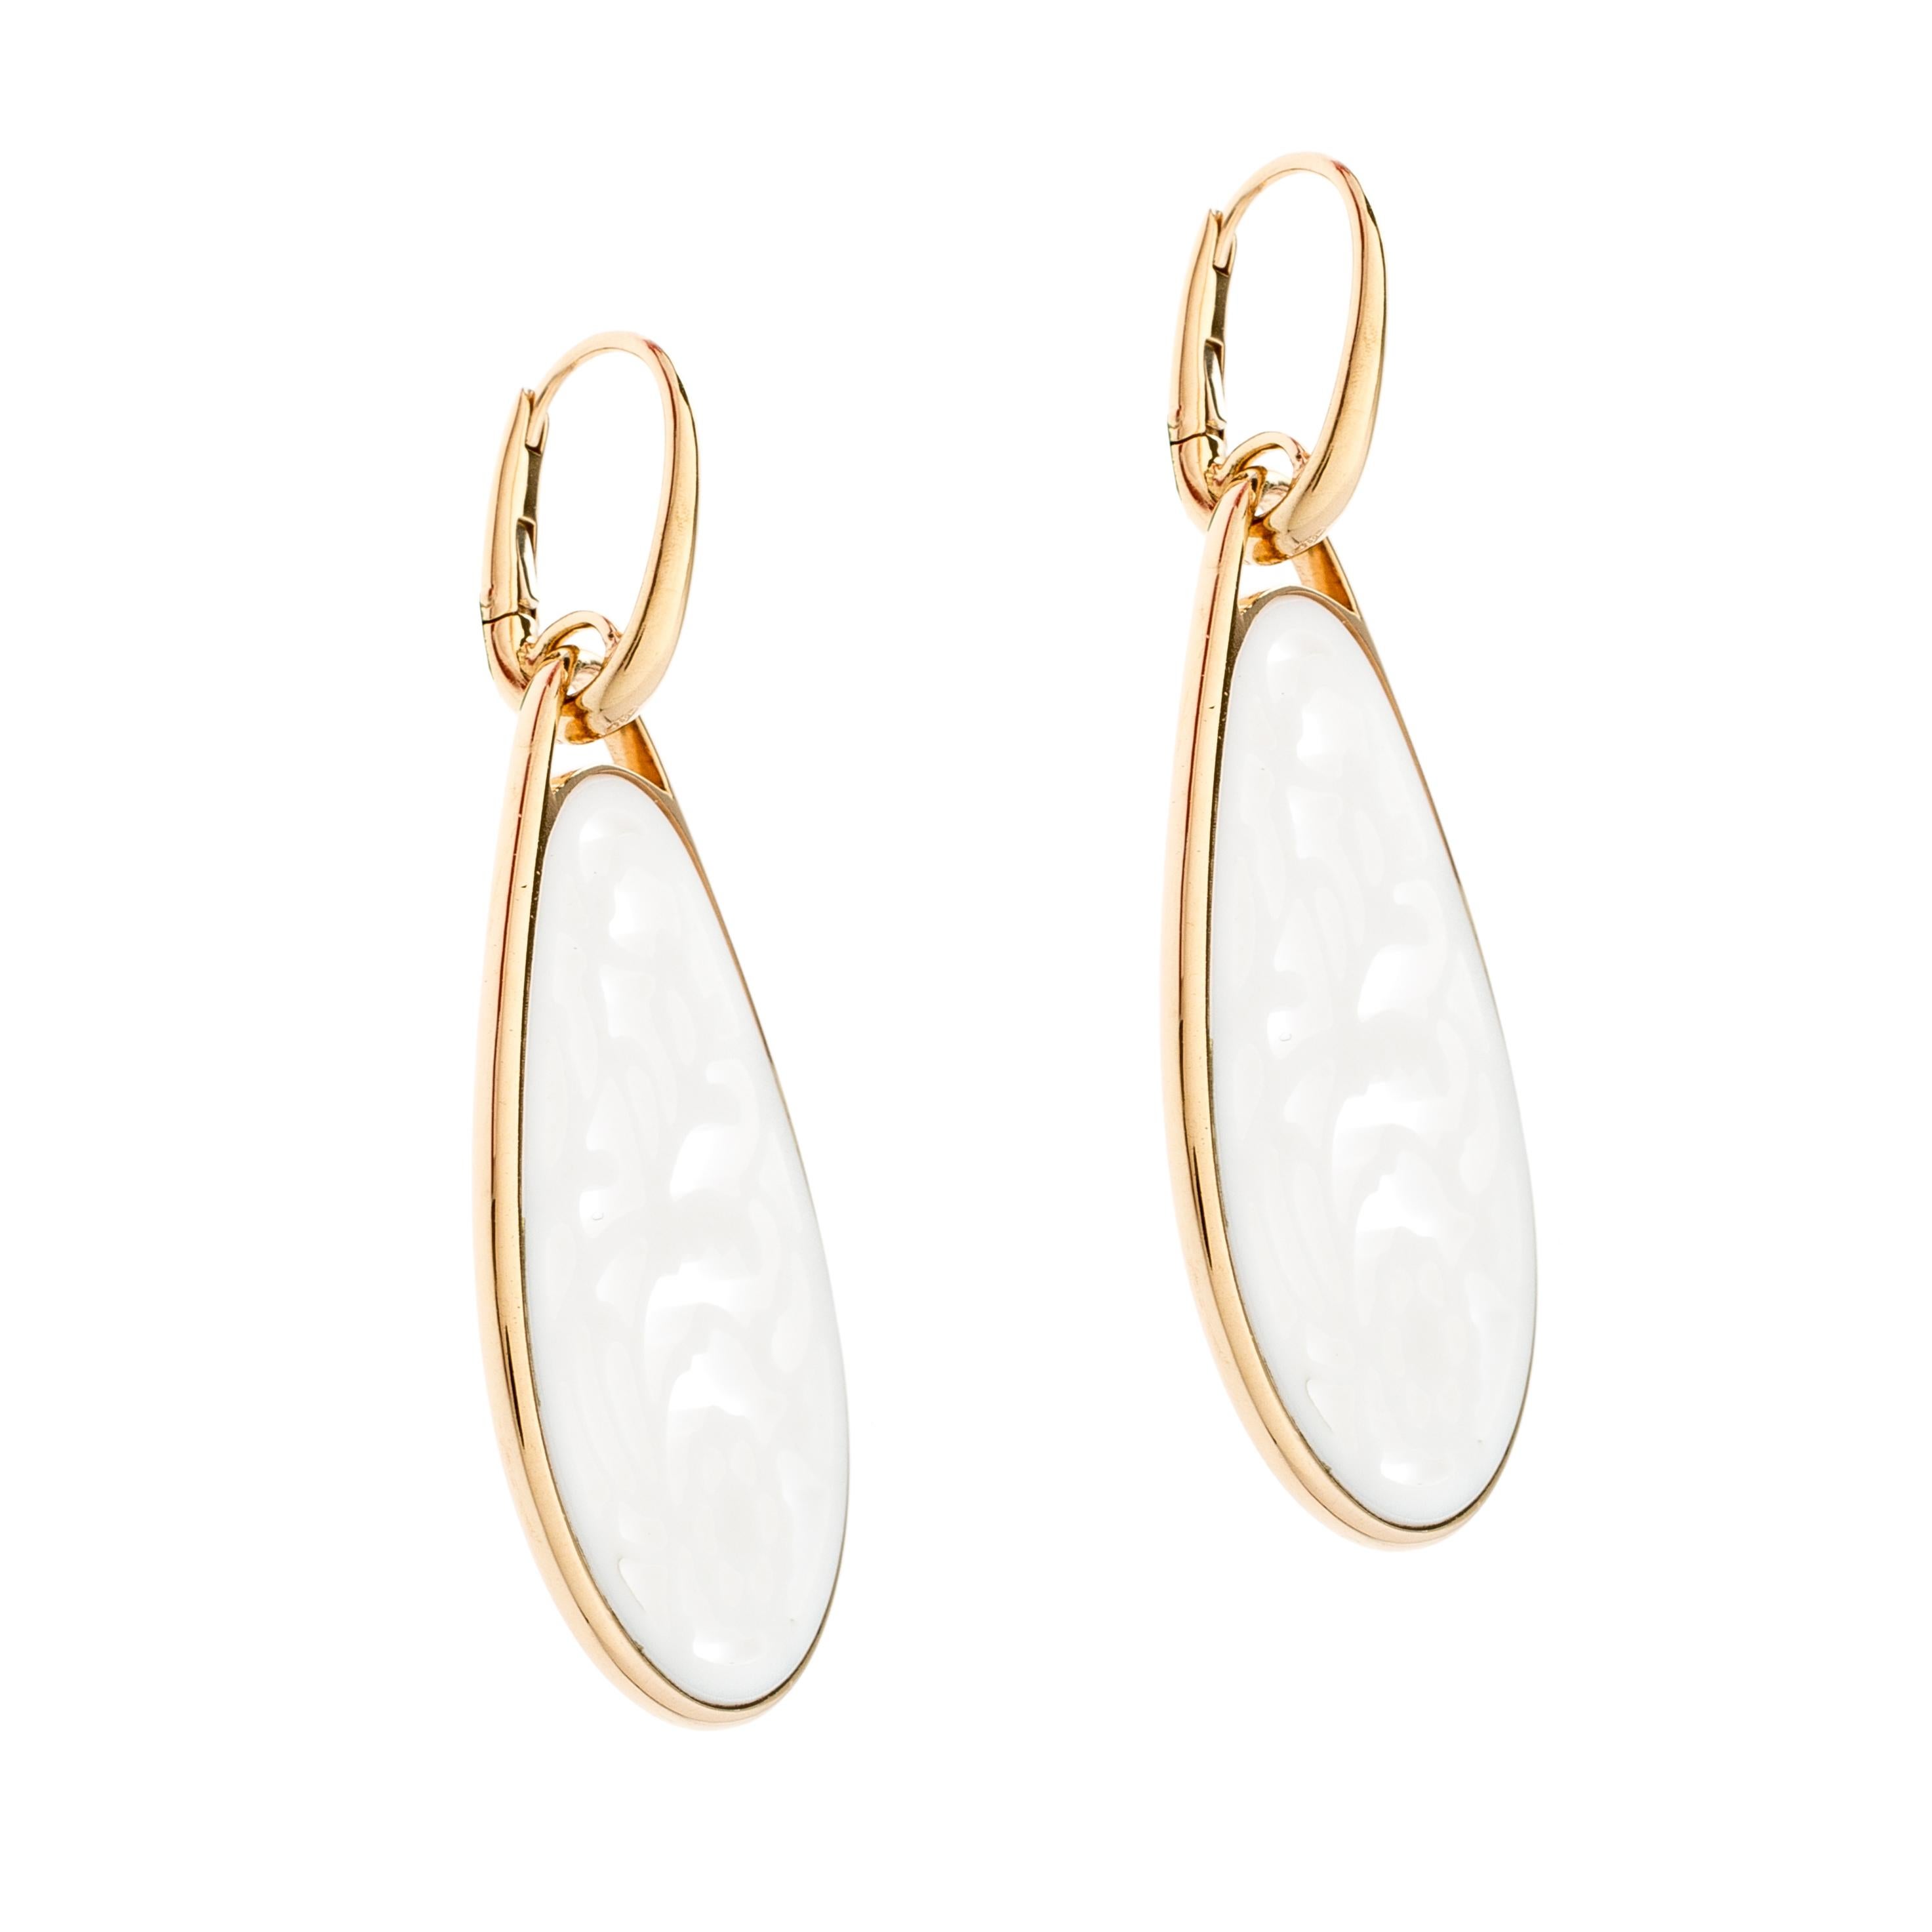 Founded in Milan in 1967 by Pino Rabolini, Pomellato's designs bring the prêt-à-porter philosophy to the otherwise traditional realm of jewelry. These earrings, made by the house's experts, are in 18k yellow gold. The earrings come as drop motifs